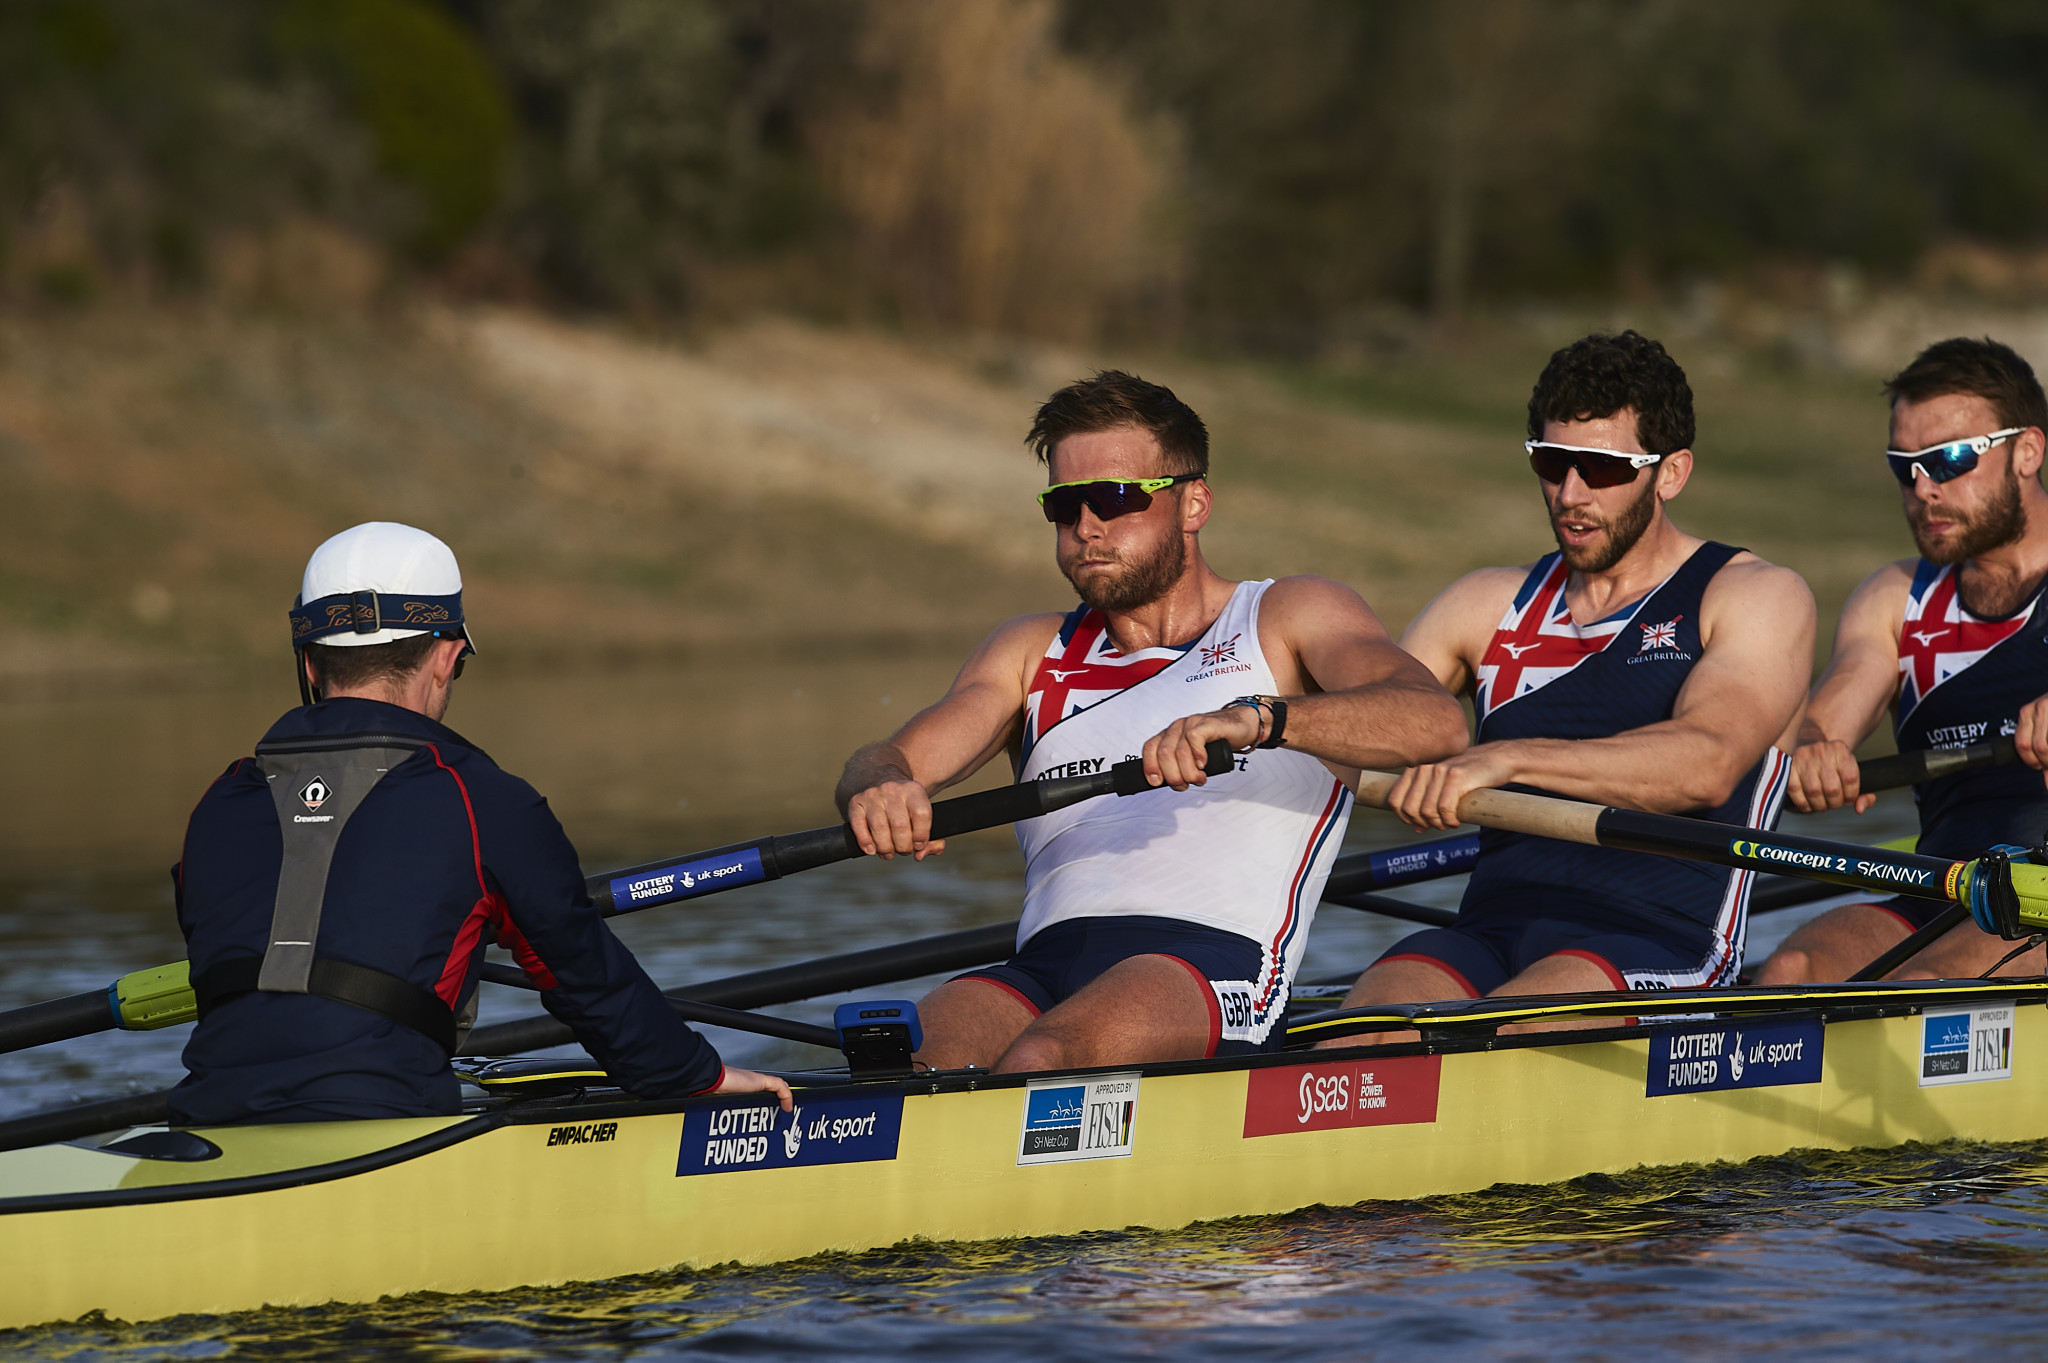 British Rowing's deal with SAS has been extended through to the postponed Olympic and Paralympic Games next year ©SAS